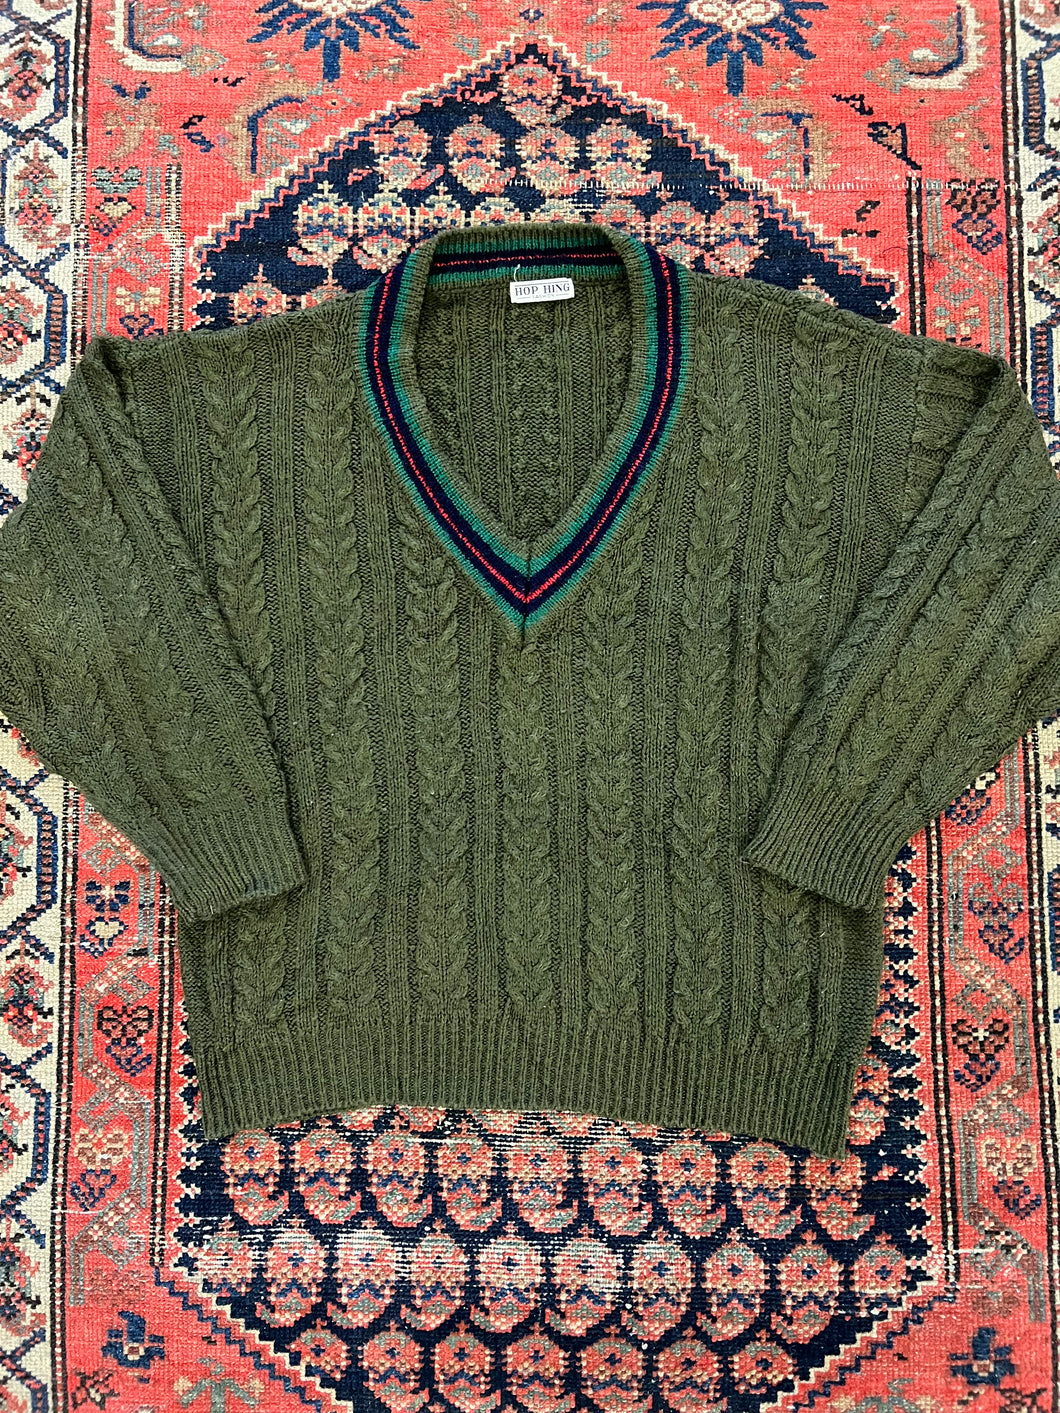 VINTAGE KNIT SWEATER - SMALL